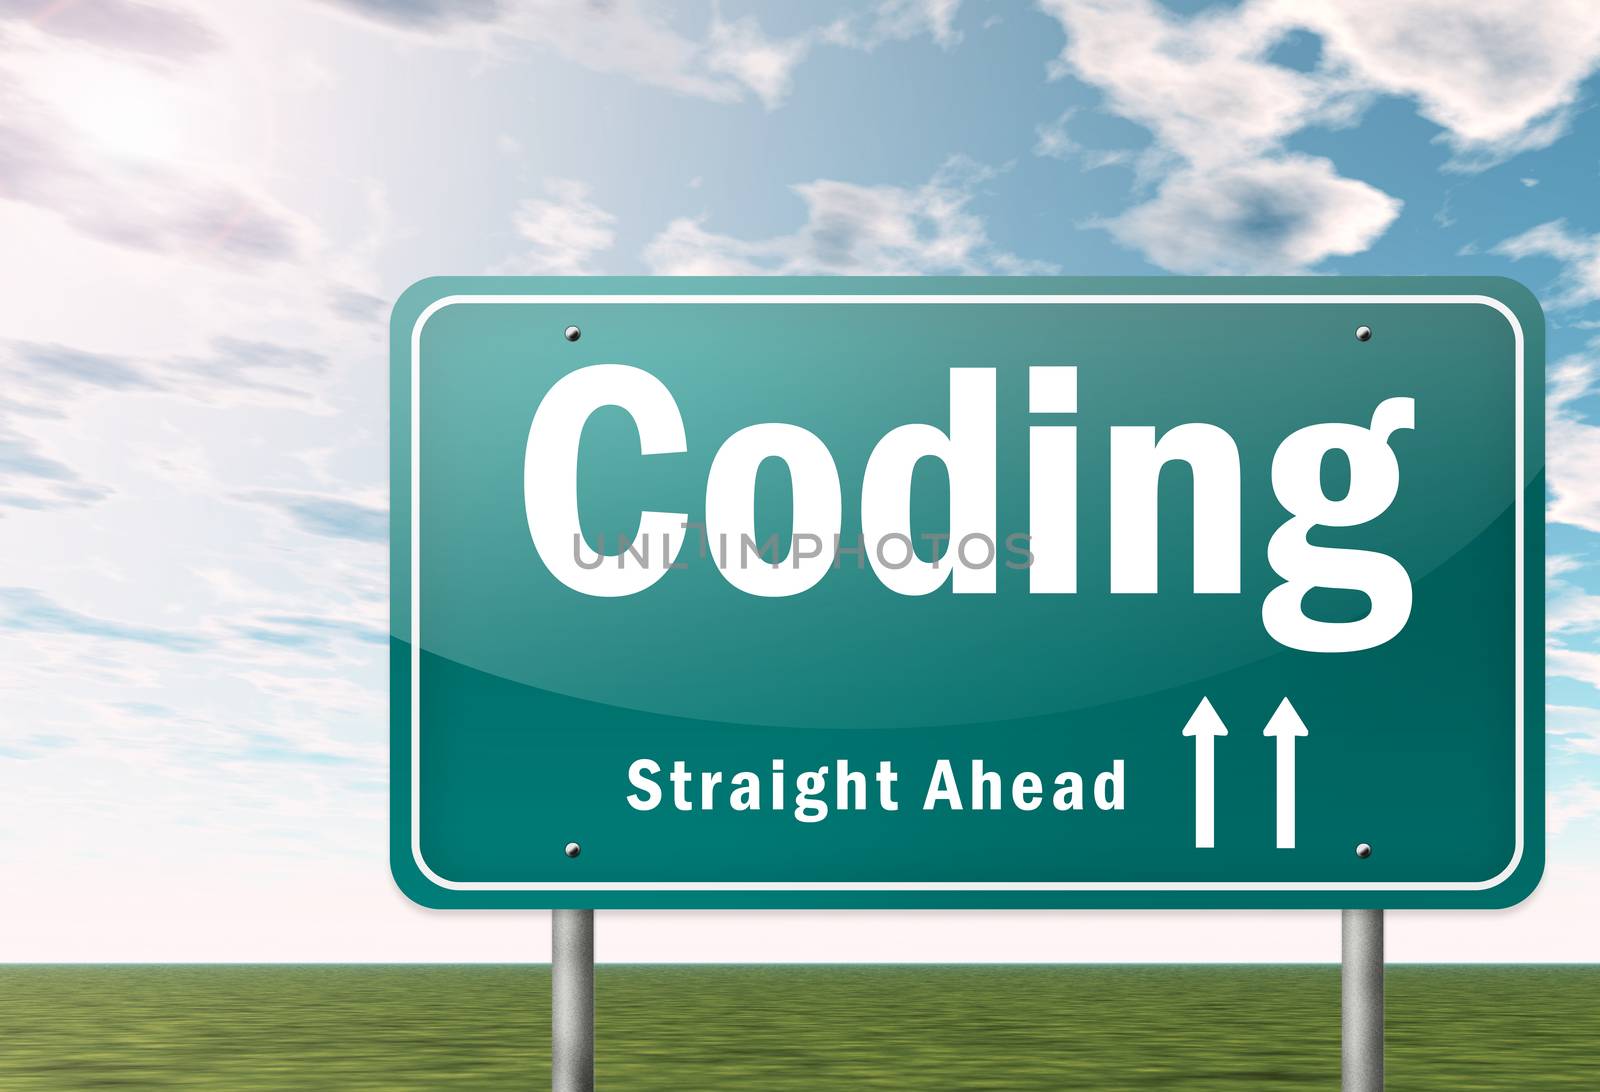 Highway Signpost with Coding wording